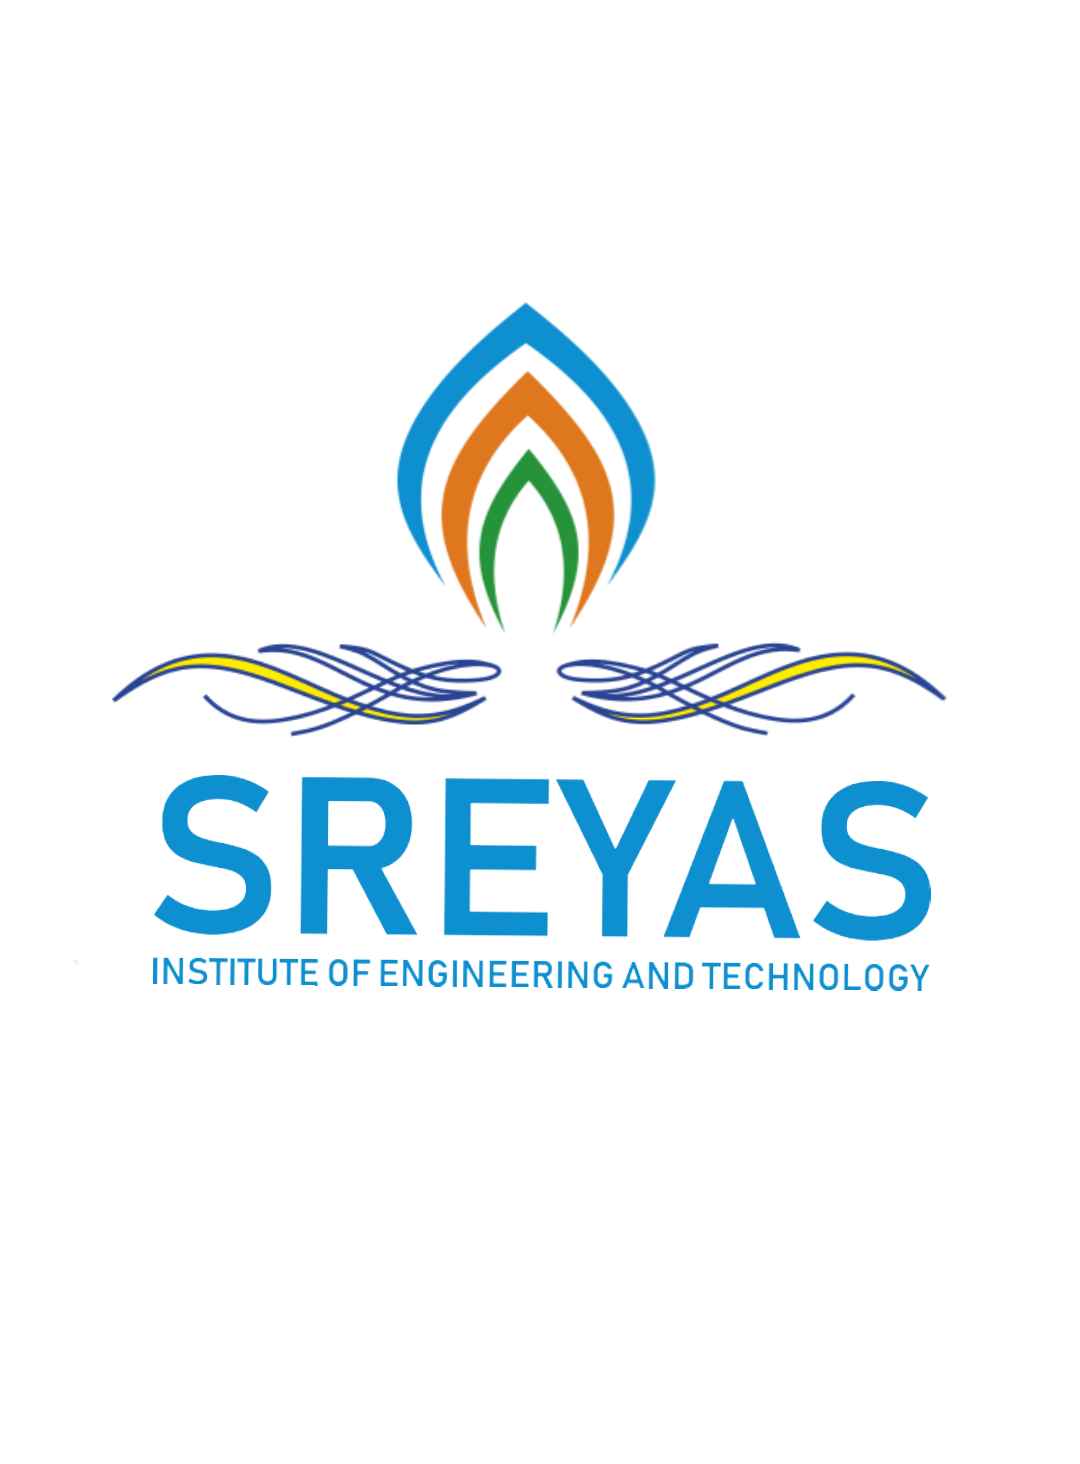 Logo of Sreyas Institute of Engineering and Technology